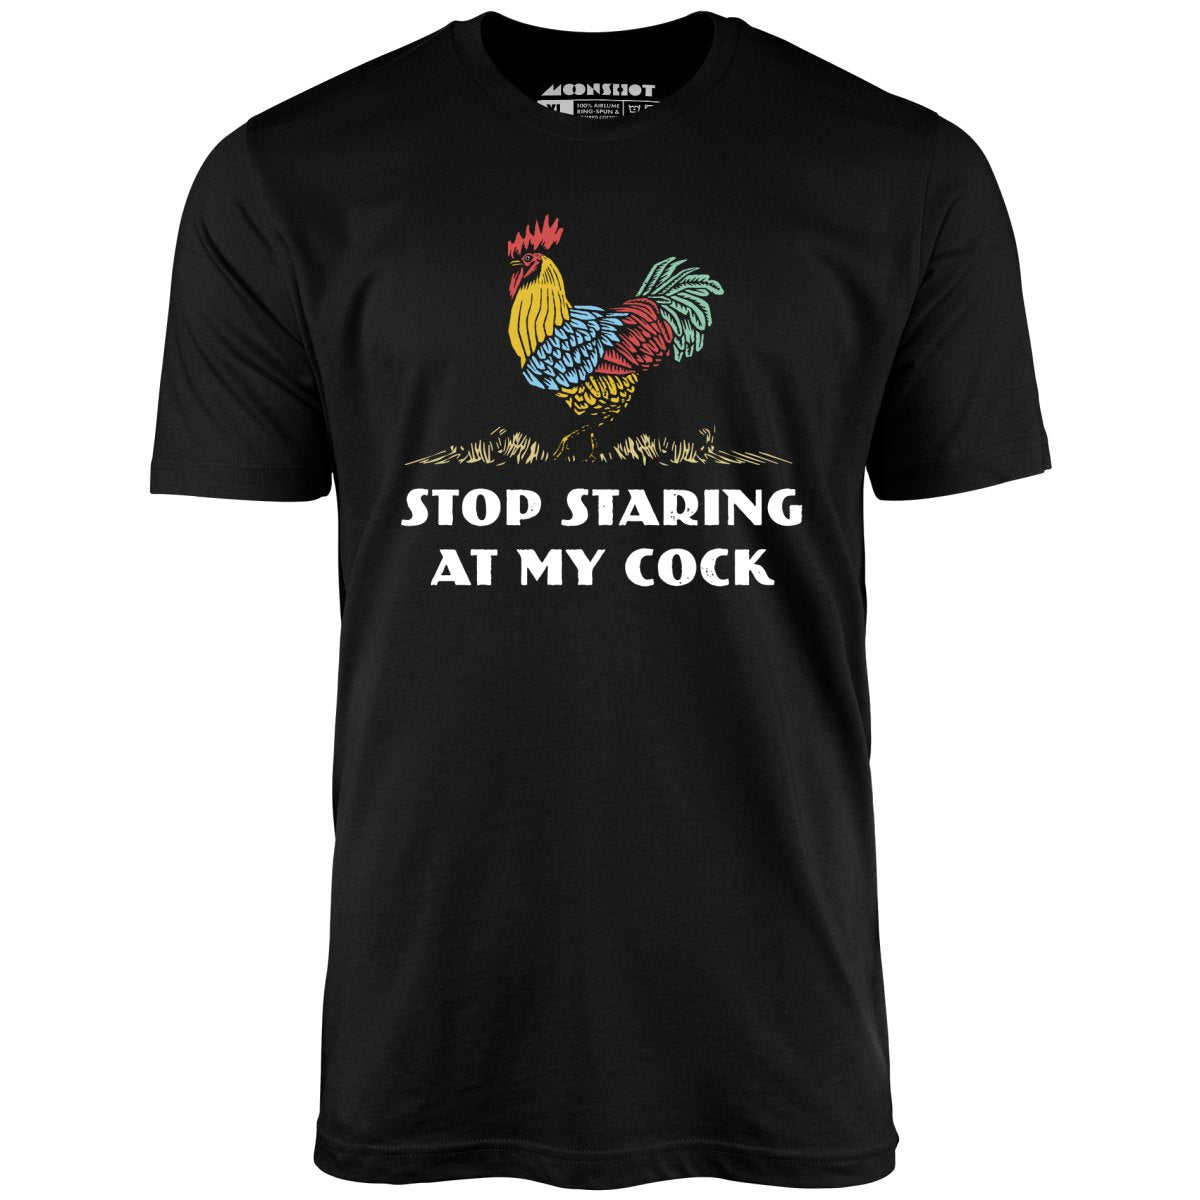 Stop Staring at My Cock - Unisex T-Shirt